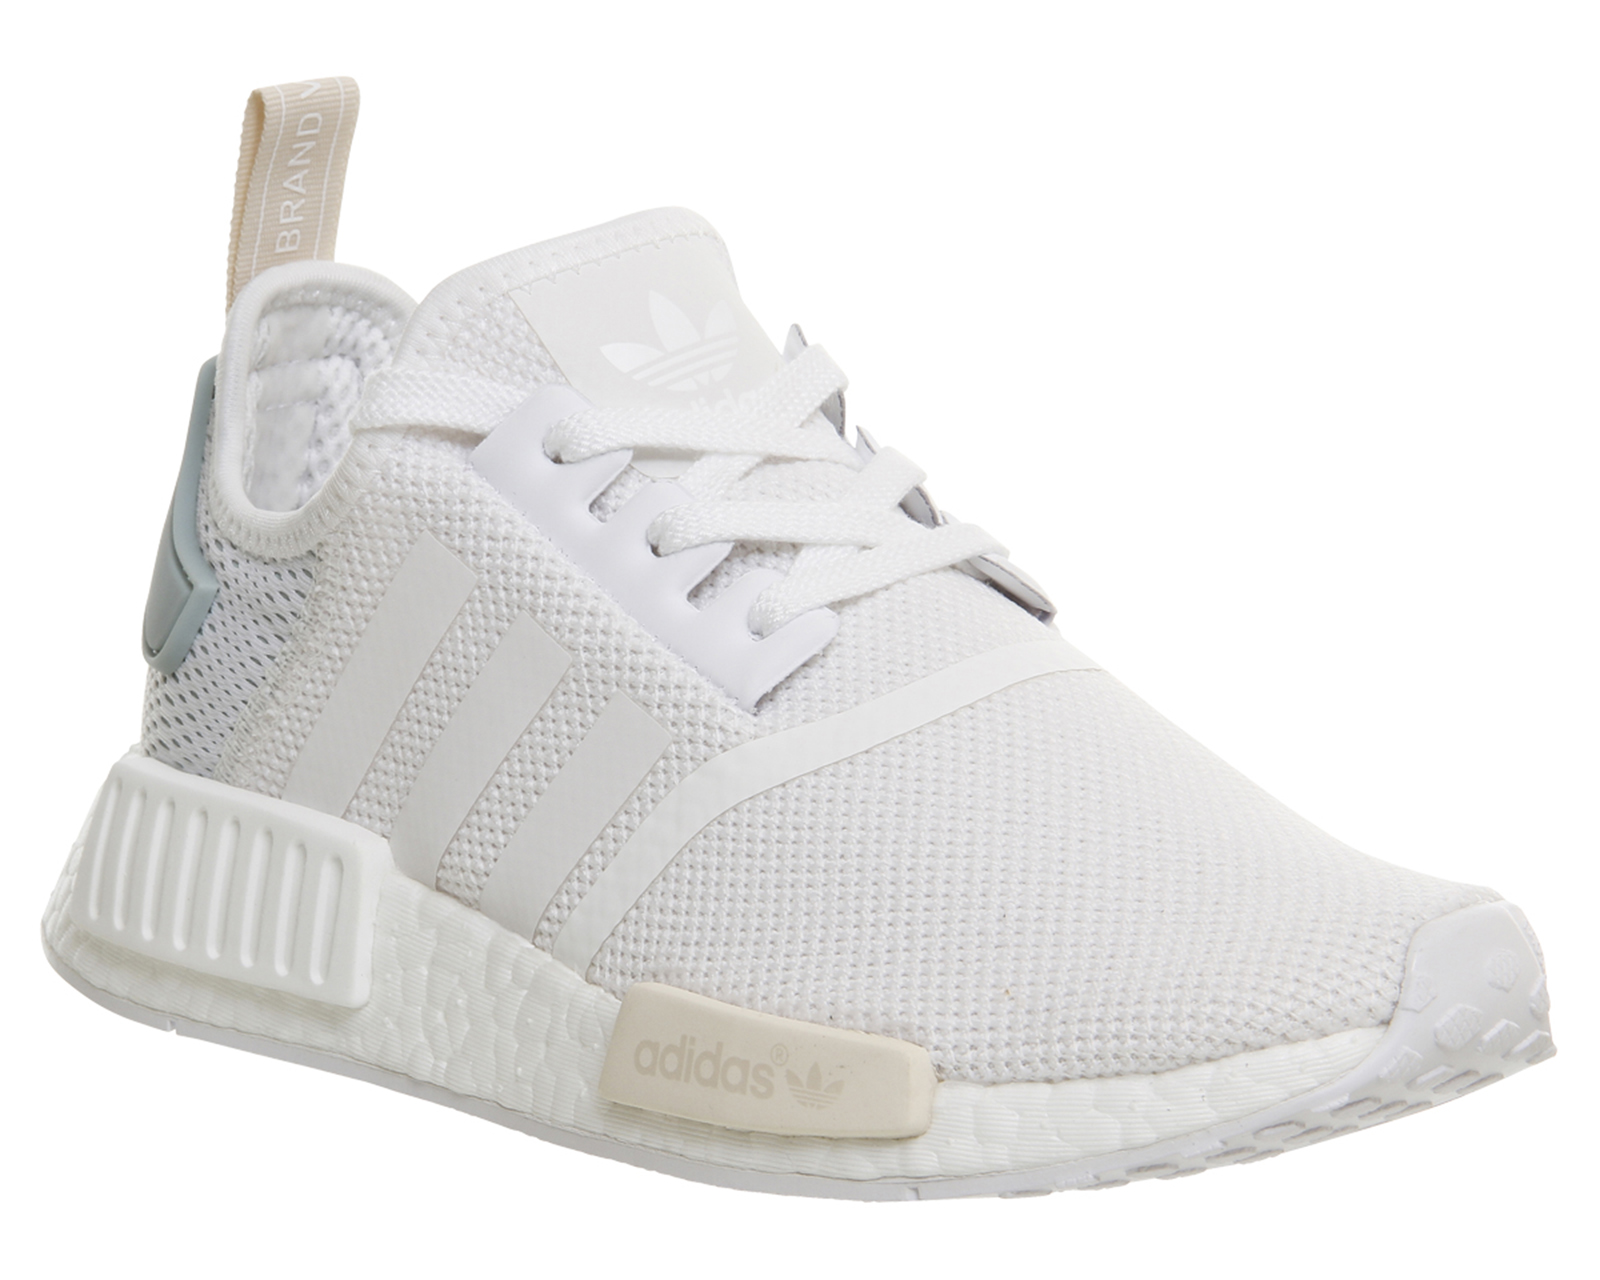 nmd adidas white tactile green